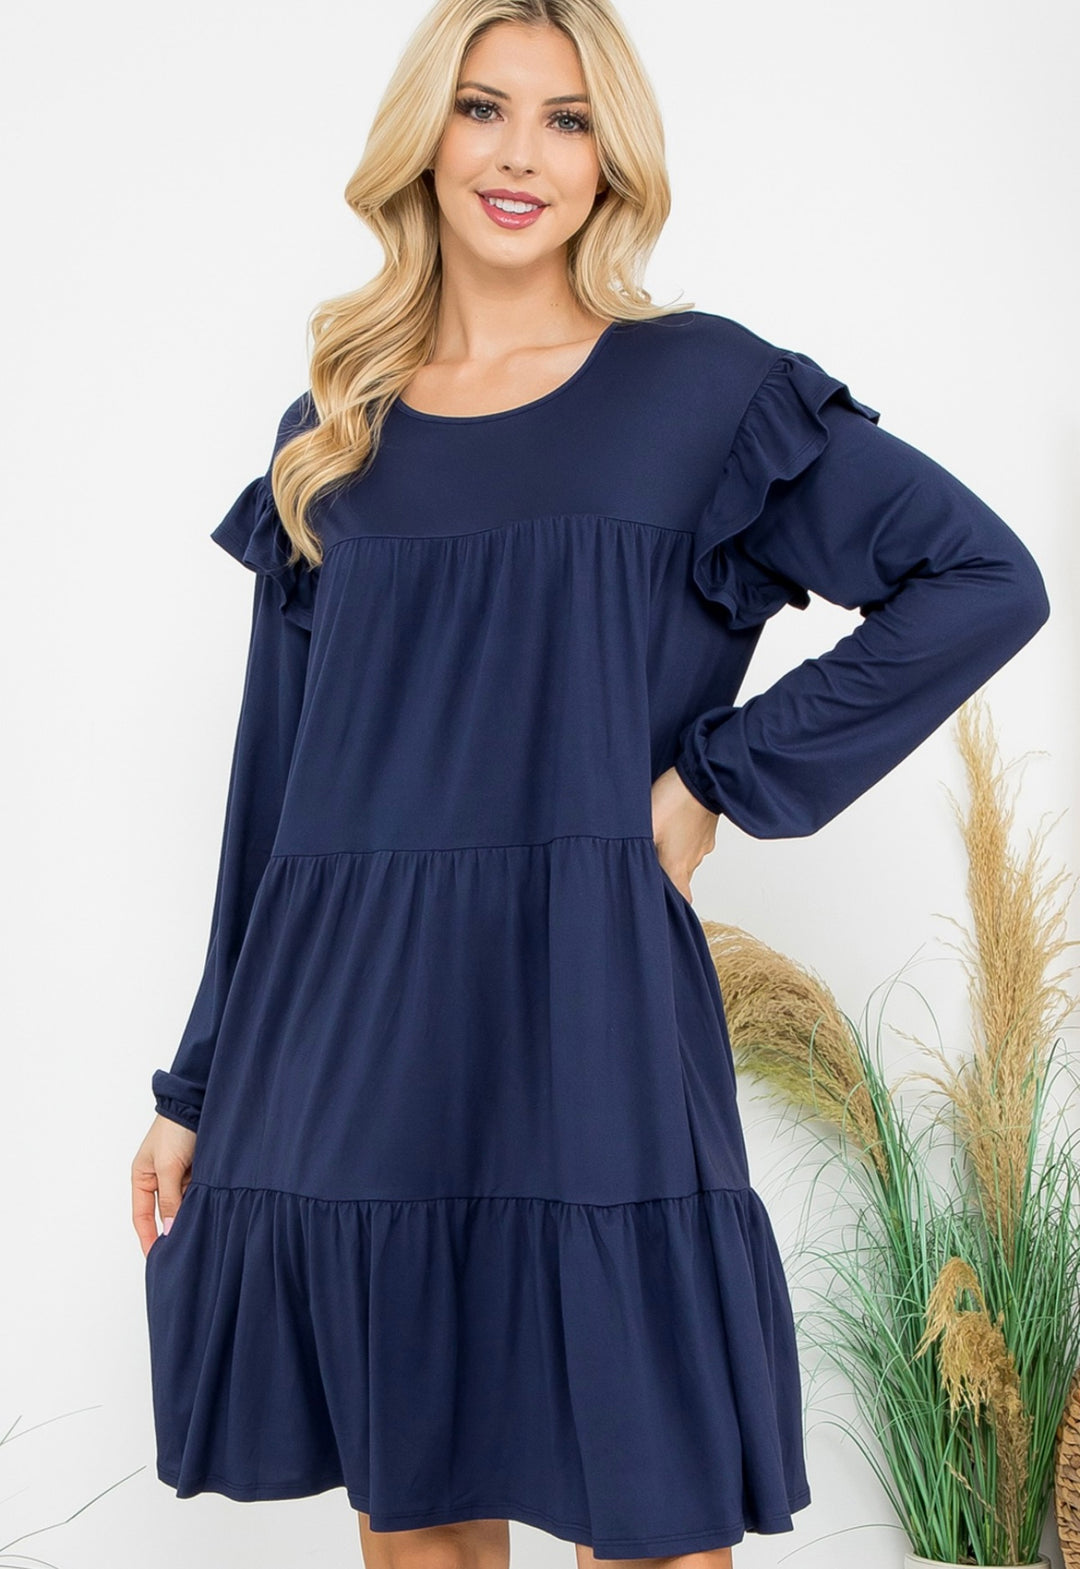 Women's Navy Blue Tiered Tunic Top with Sleeve Detail on Long Sleeves